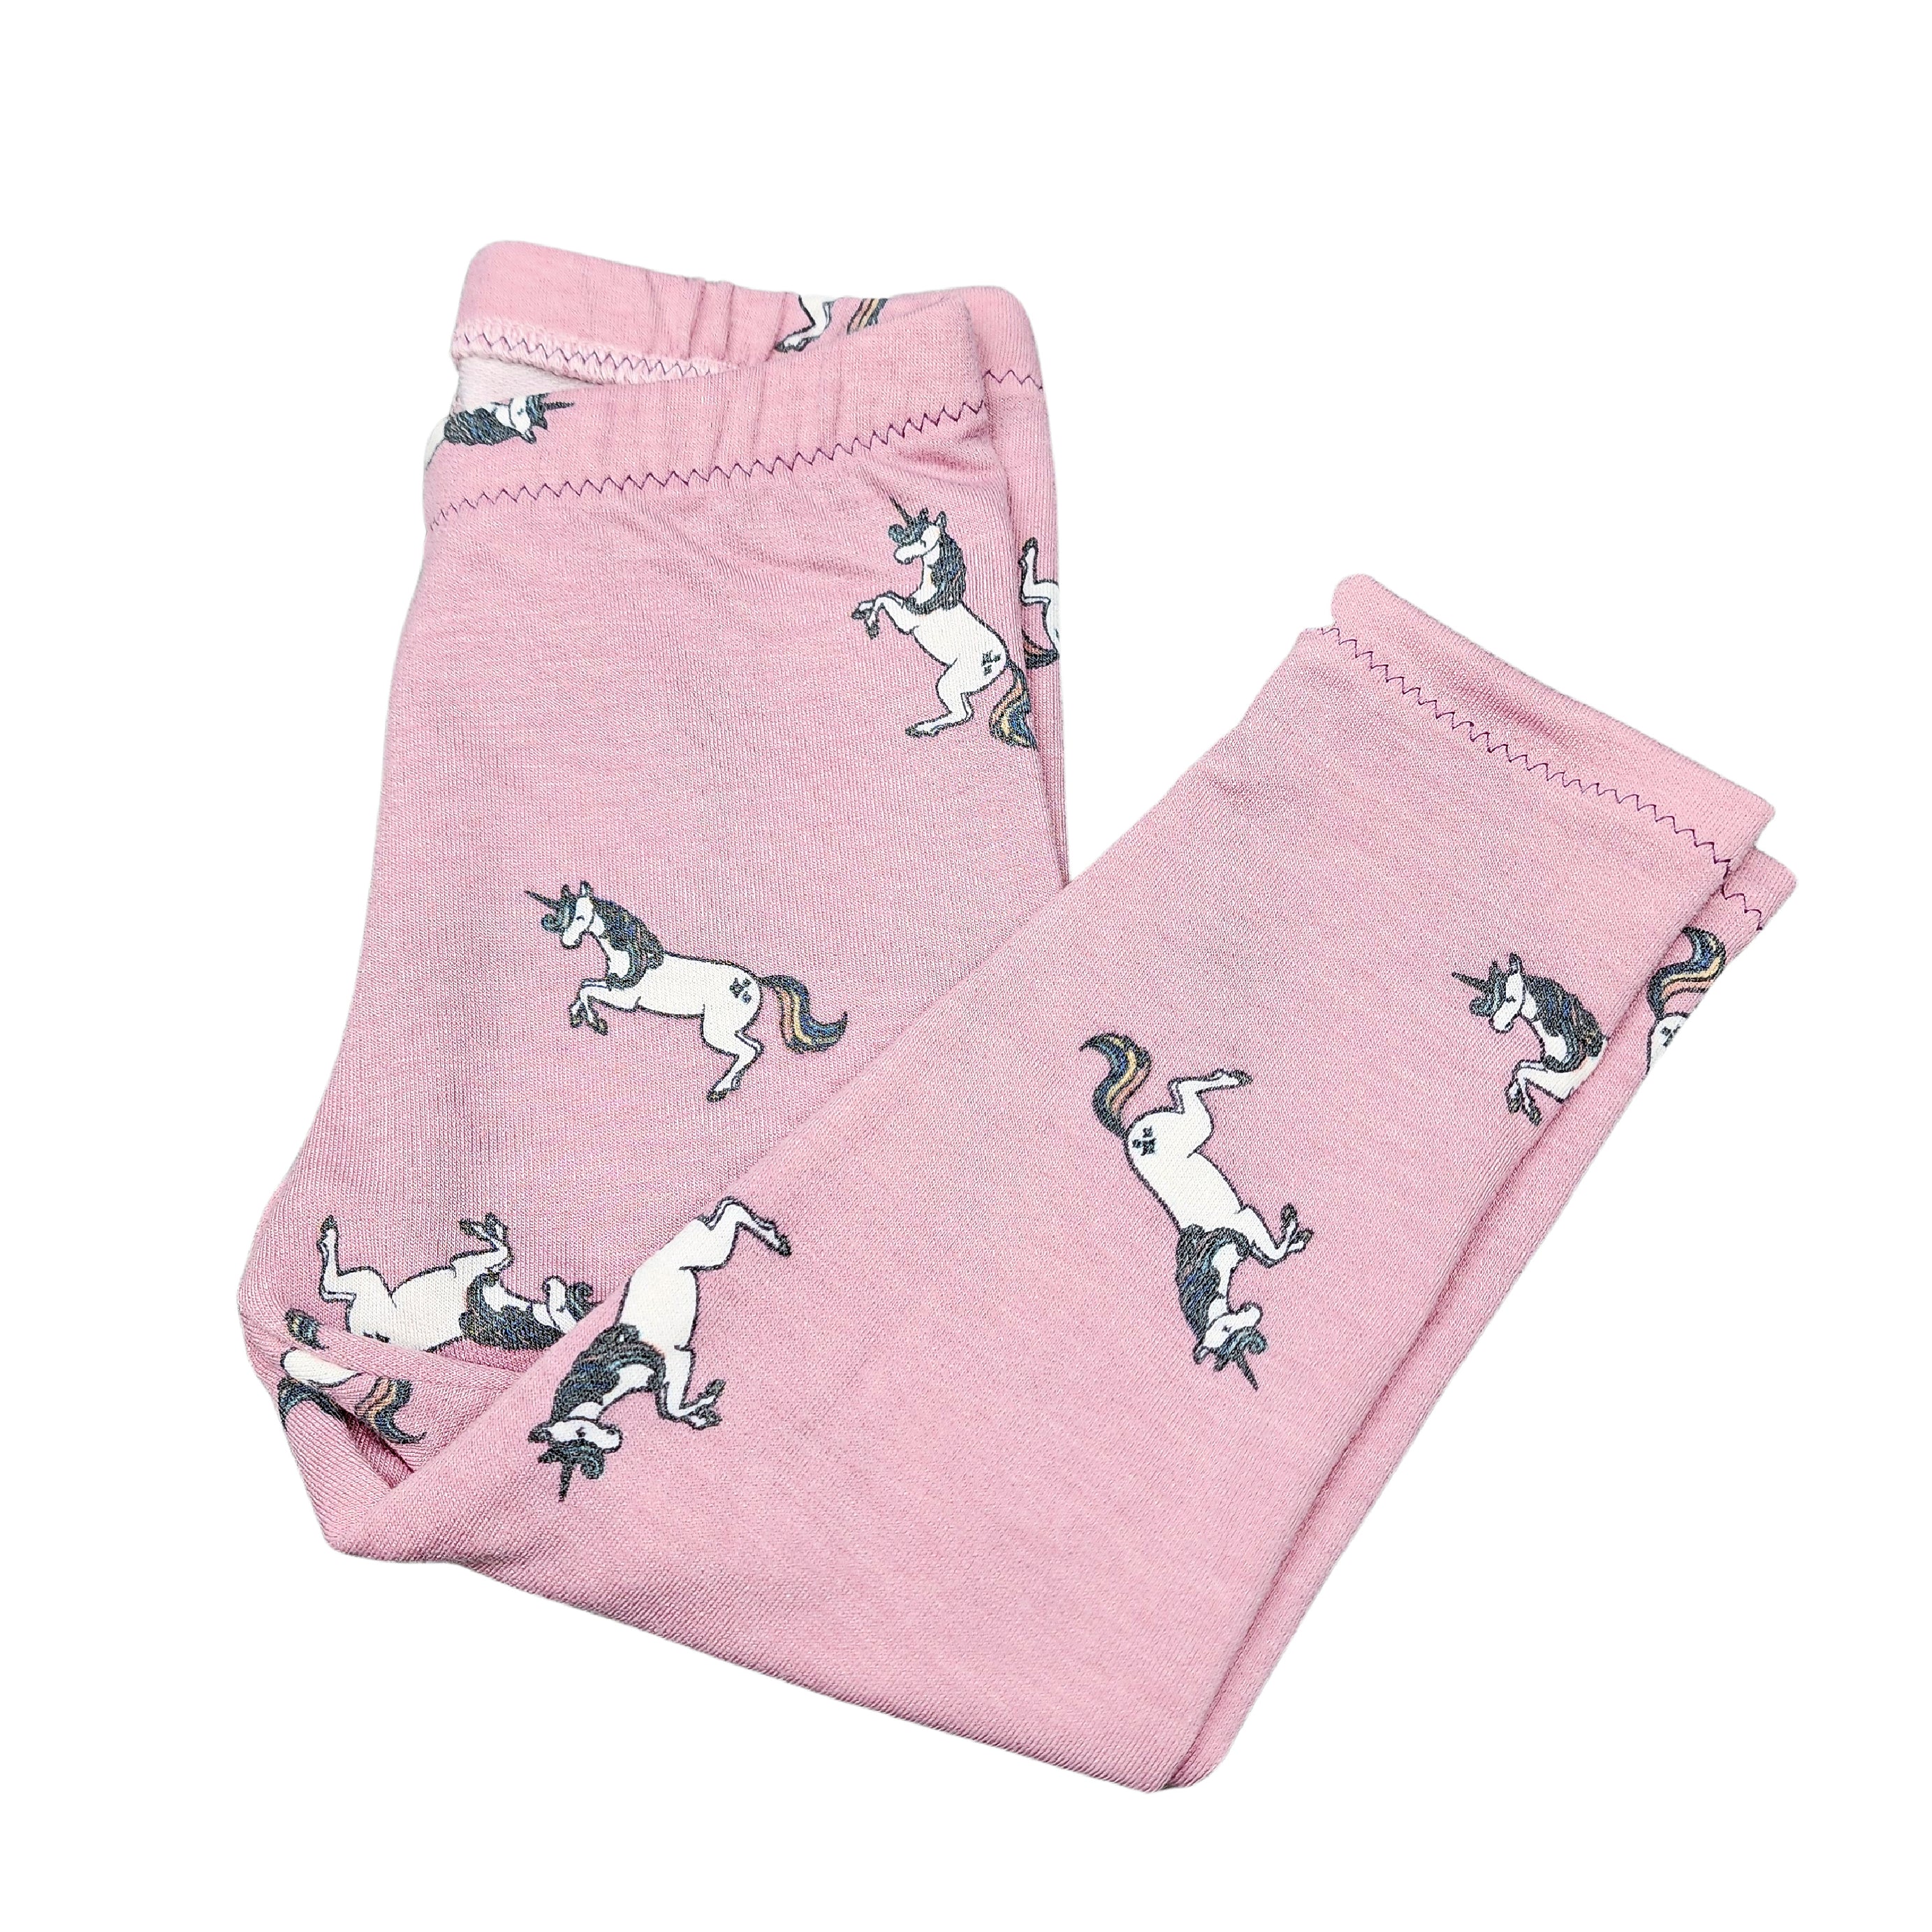 Pink Unicorn Leggings for Girls, NB to 12, French Terry